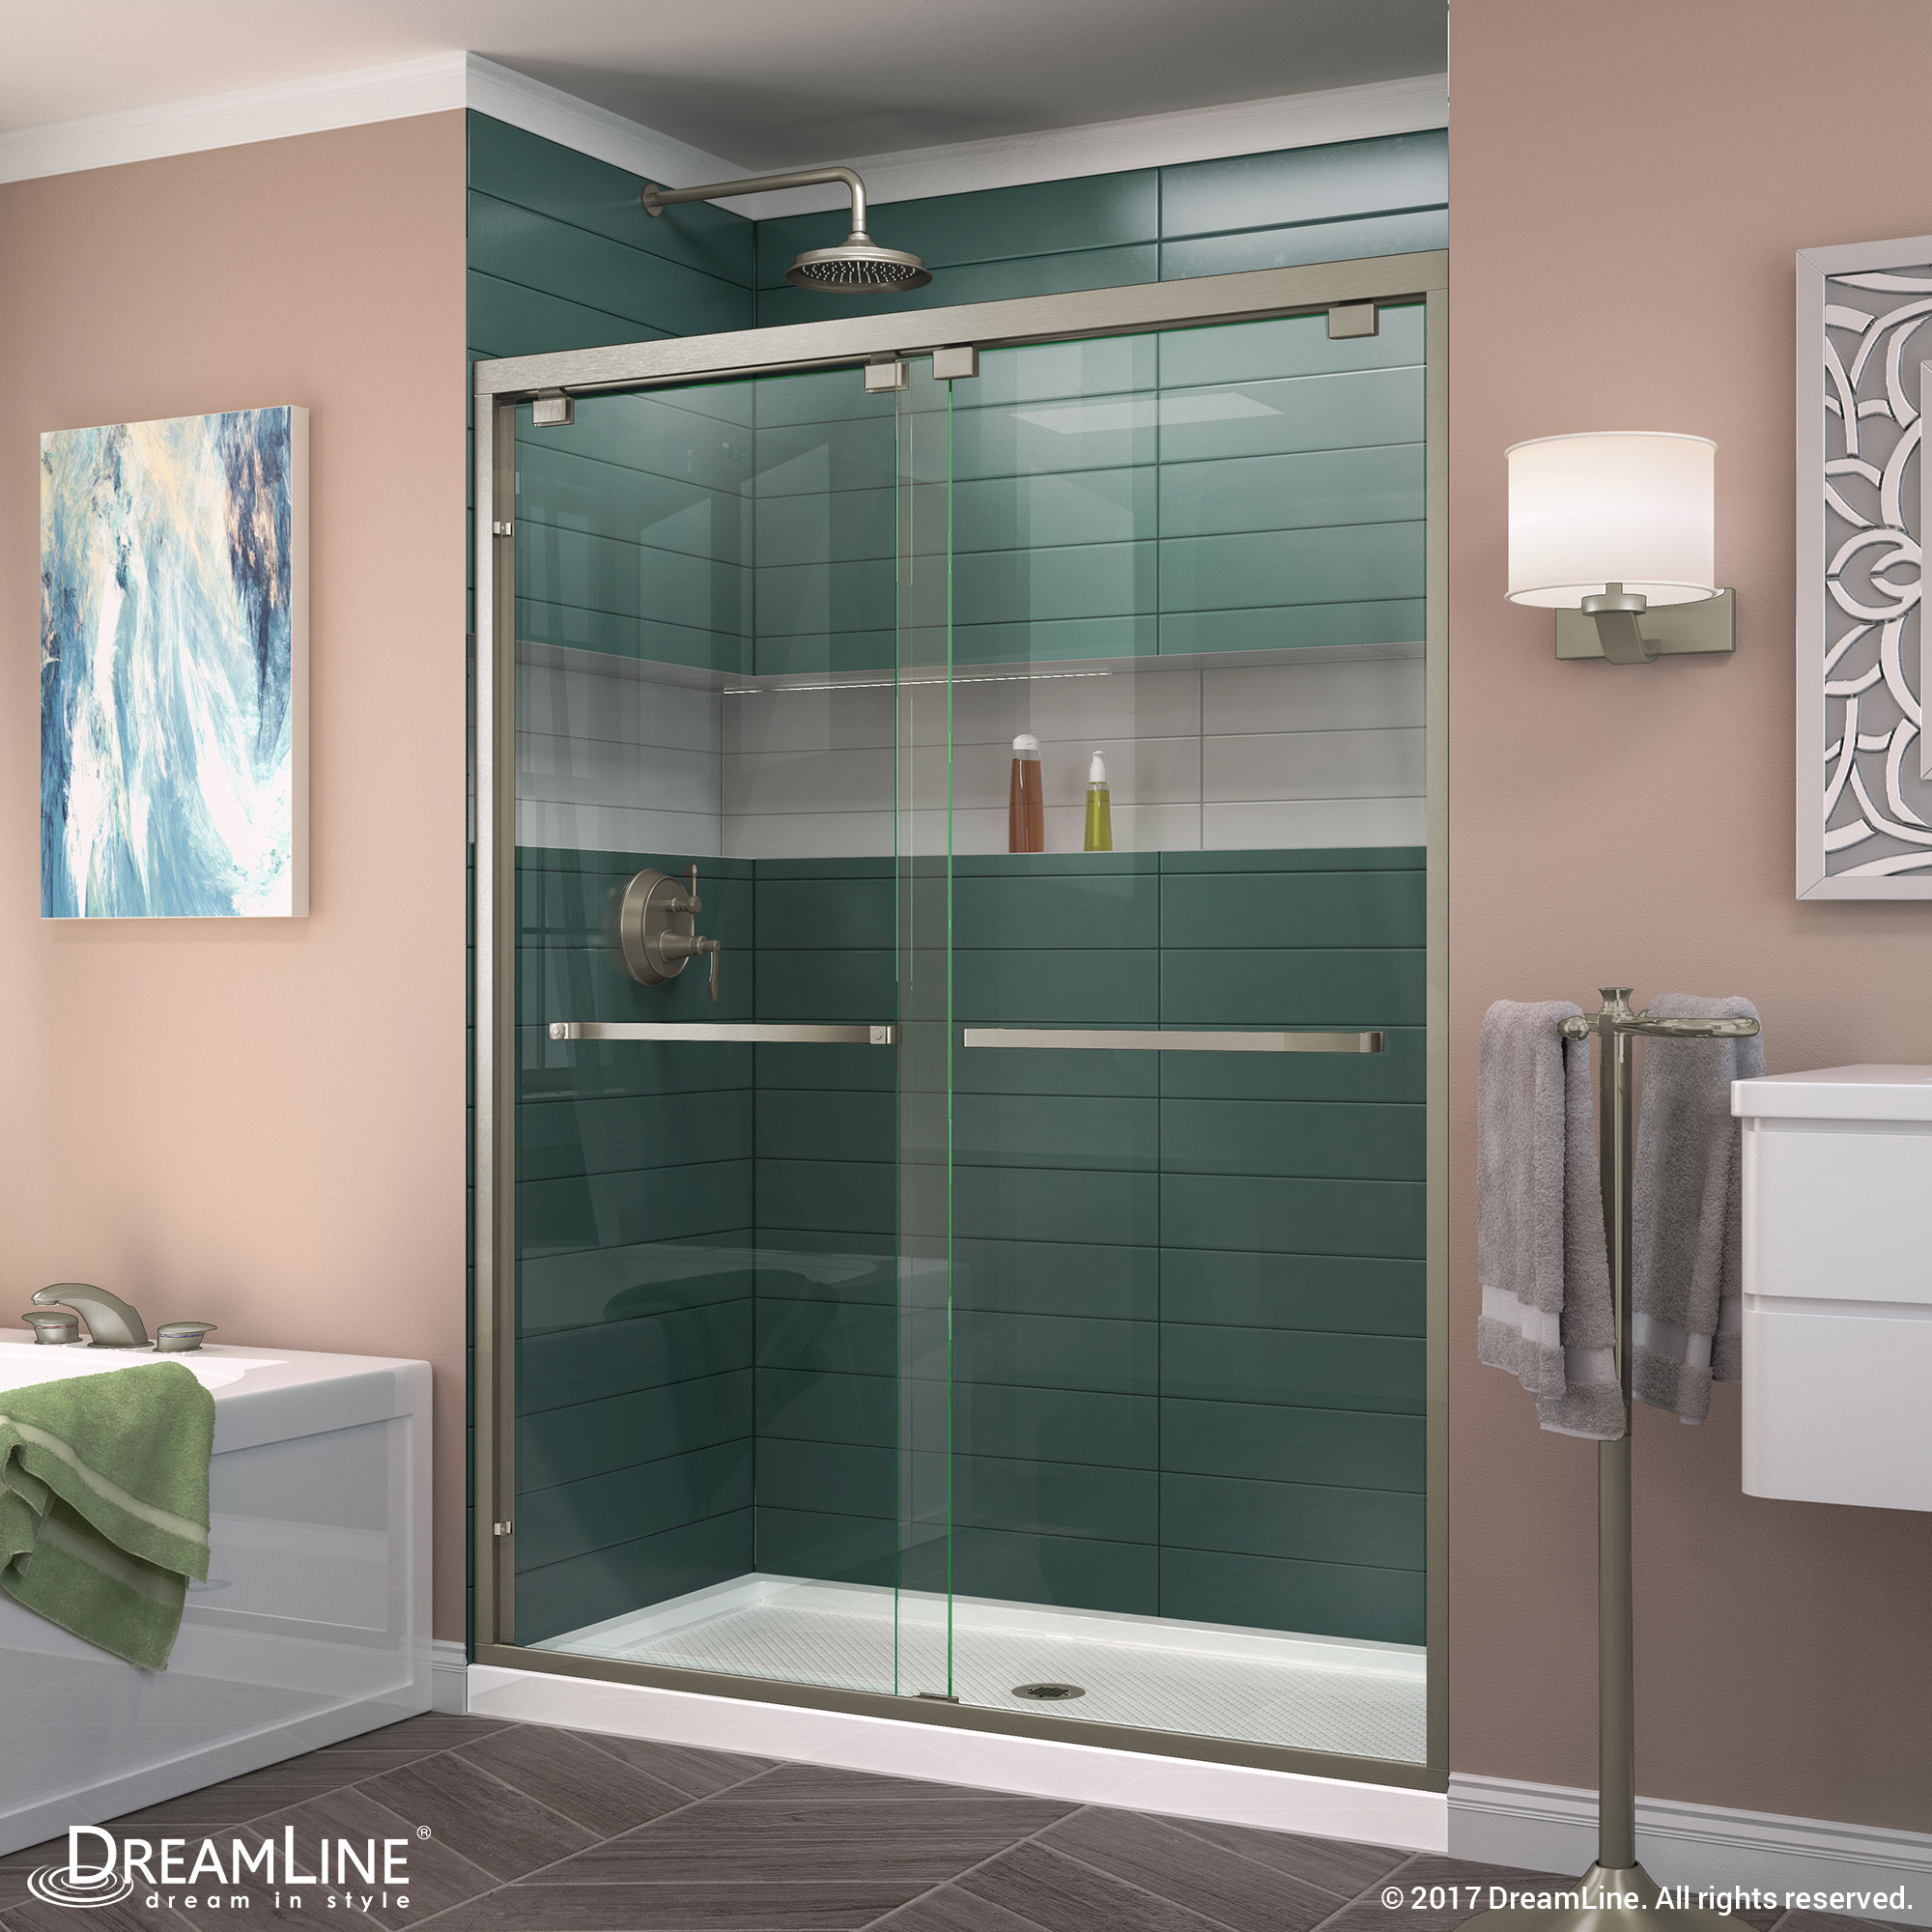 DreamLine Encore 32 in. D x 60 in. W x 78 3/4 in. H Bypass Shower Door in Chrome and Center Drain White Base Kit